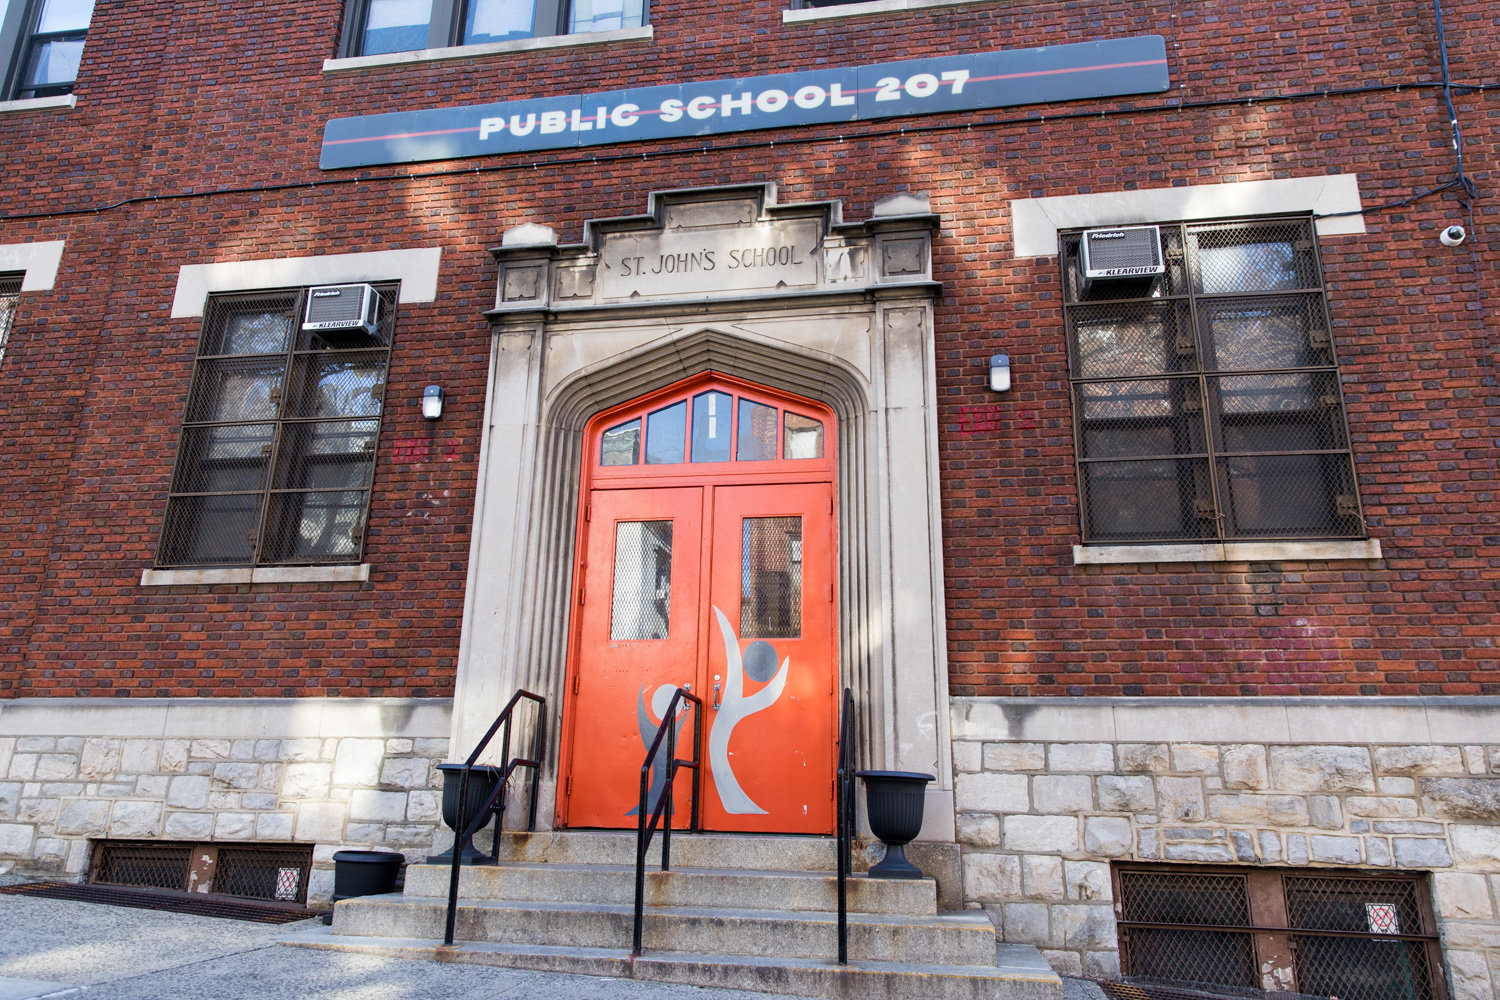 P.S. 207 is one among many school closures citywide following a press conference by Mayor Bill de Blasio in which he announced that schools would remain closed until at least April 20.